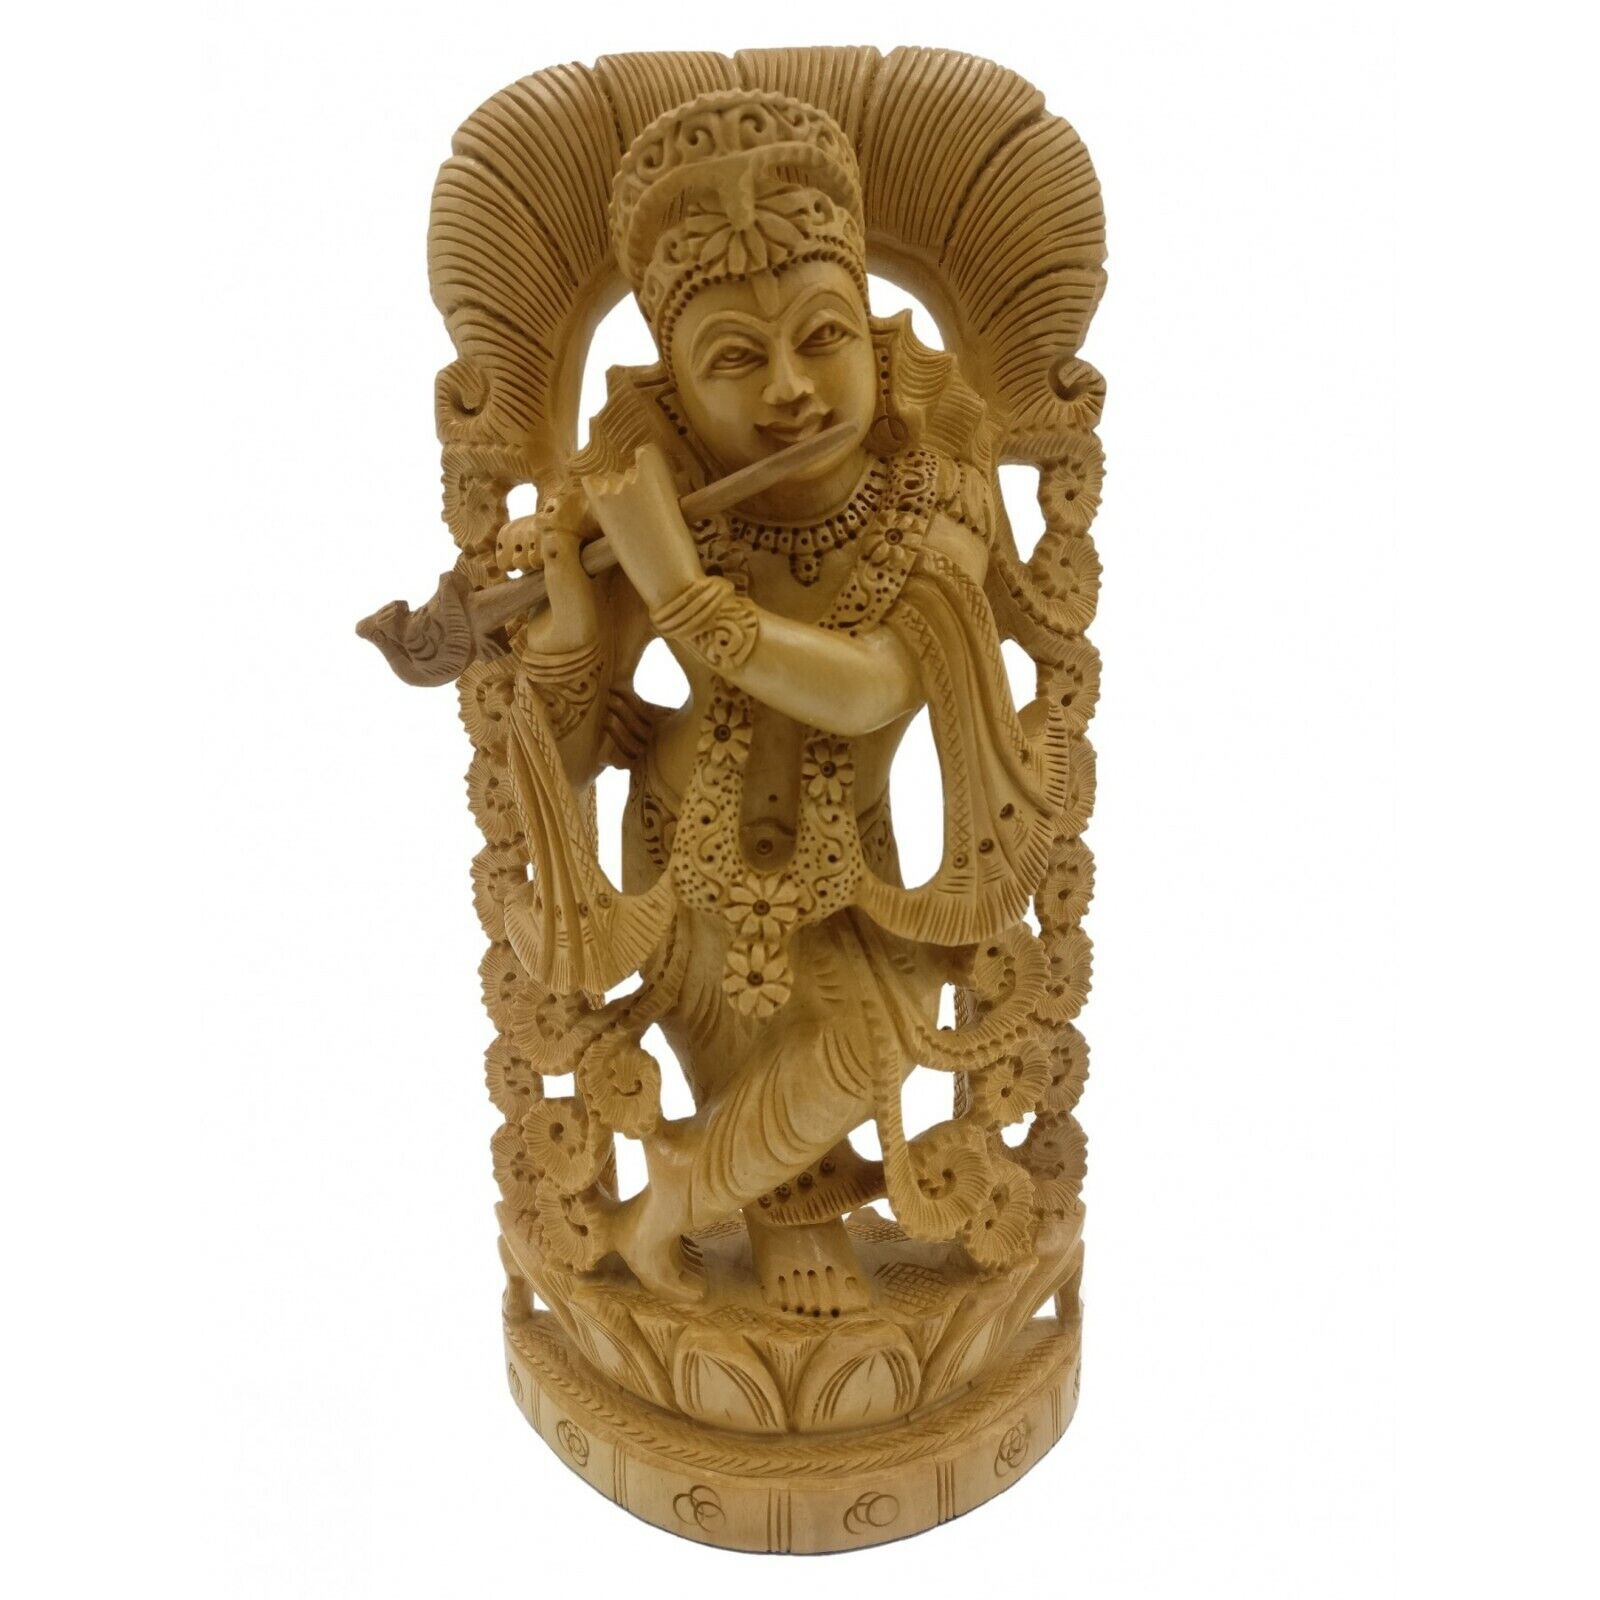 Beautiful Handcrafted Wooden Lord Krishna Playing Flute Statue From India (DP2)